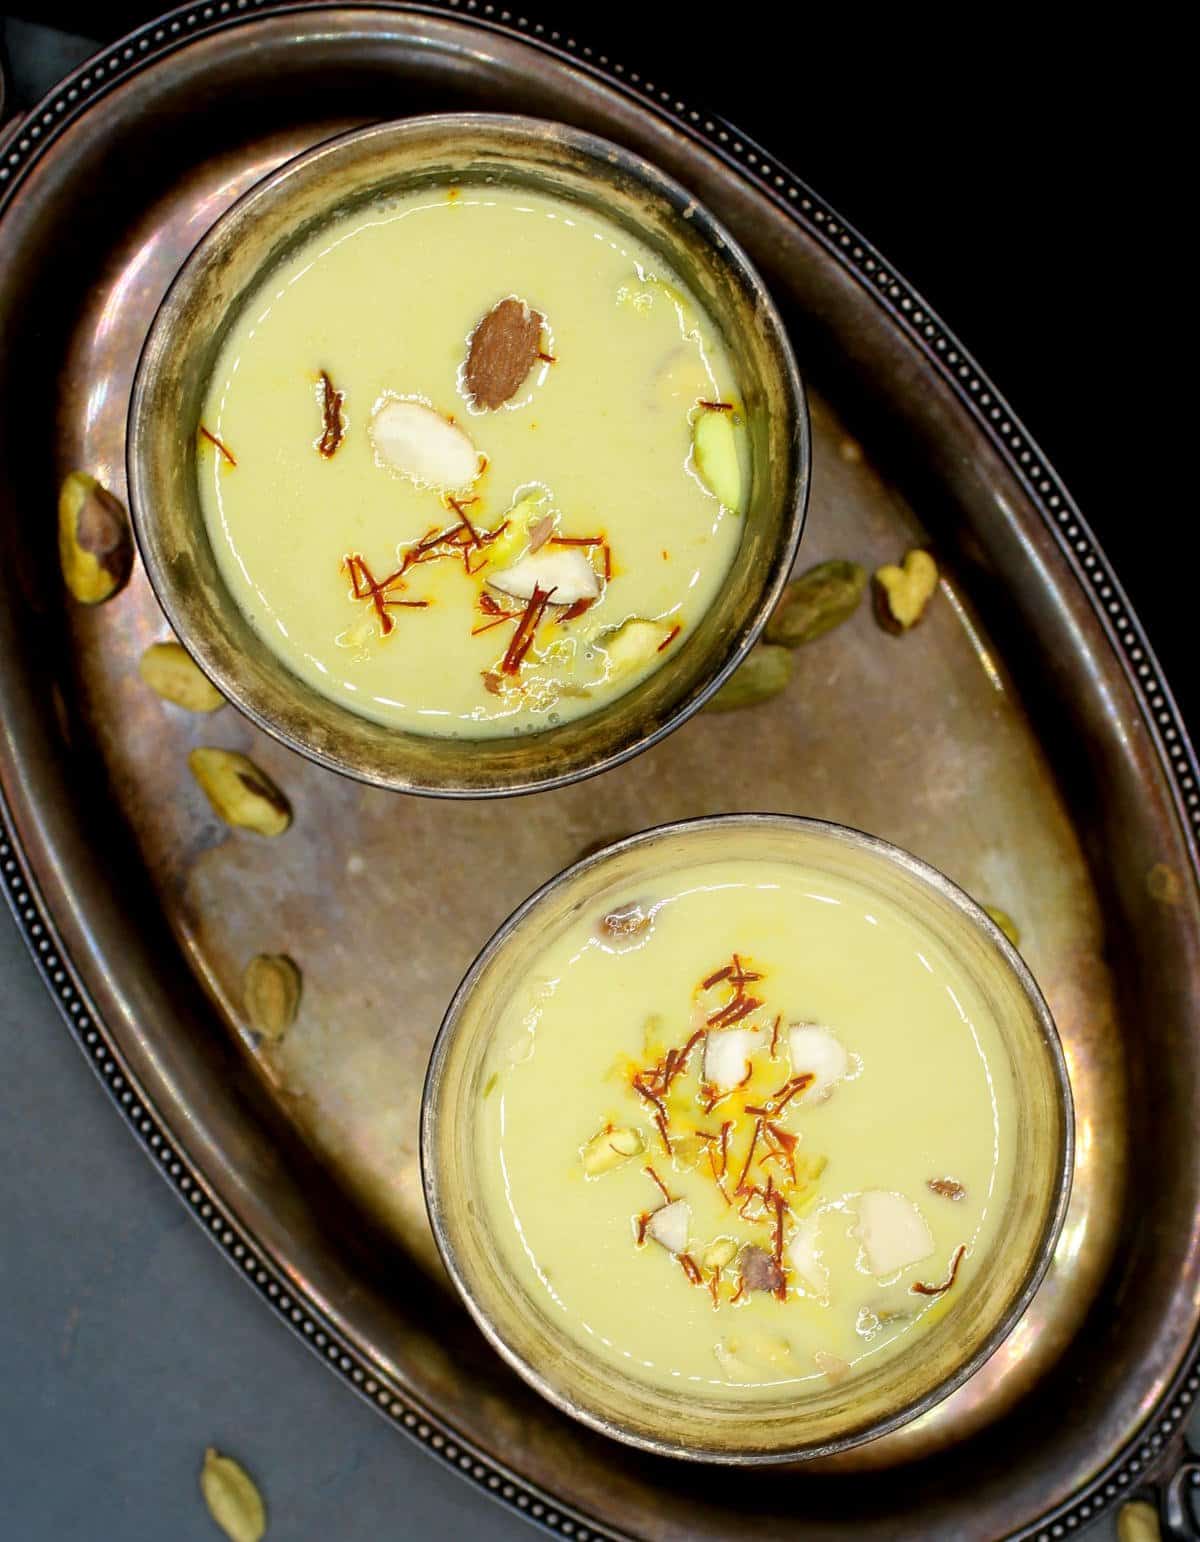 Overhead shot of two silver glasses of thandai with oat milk, saffron strands, almonds and pistachios.